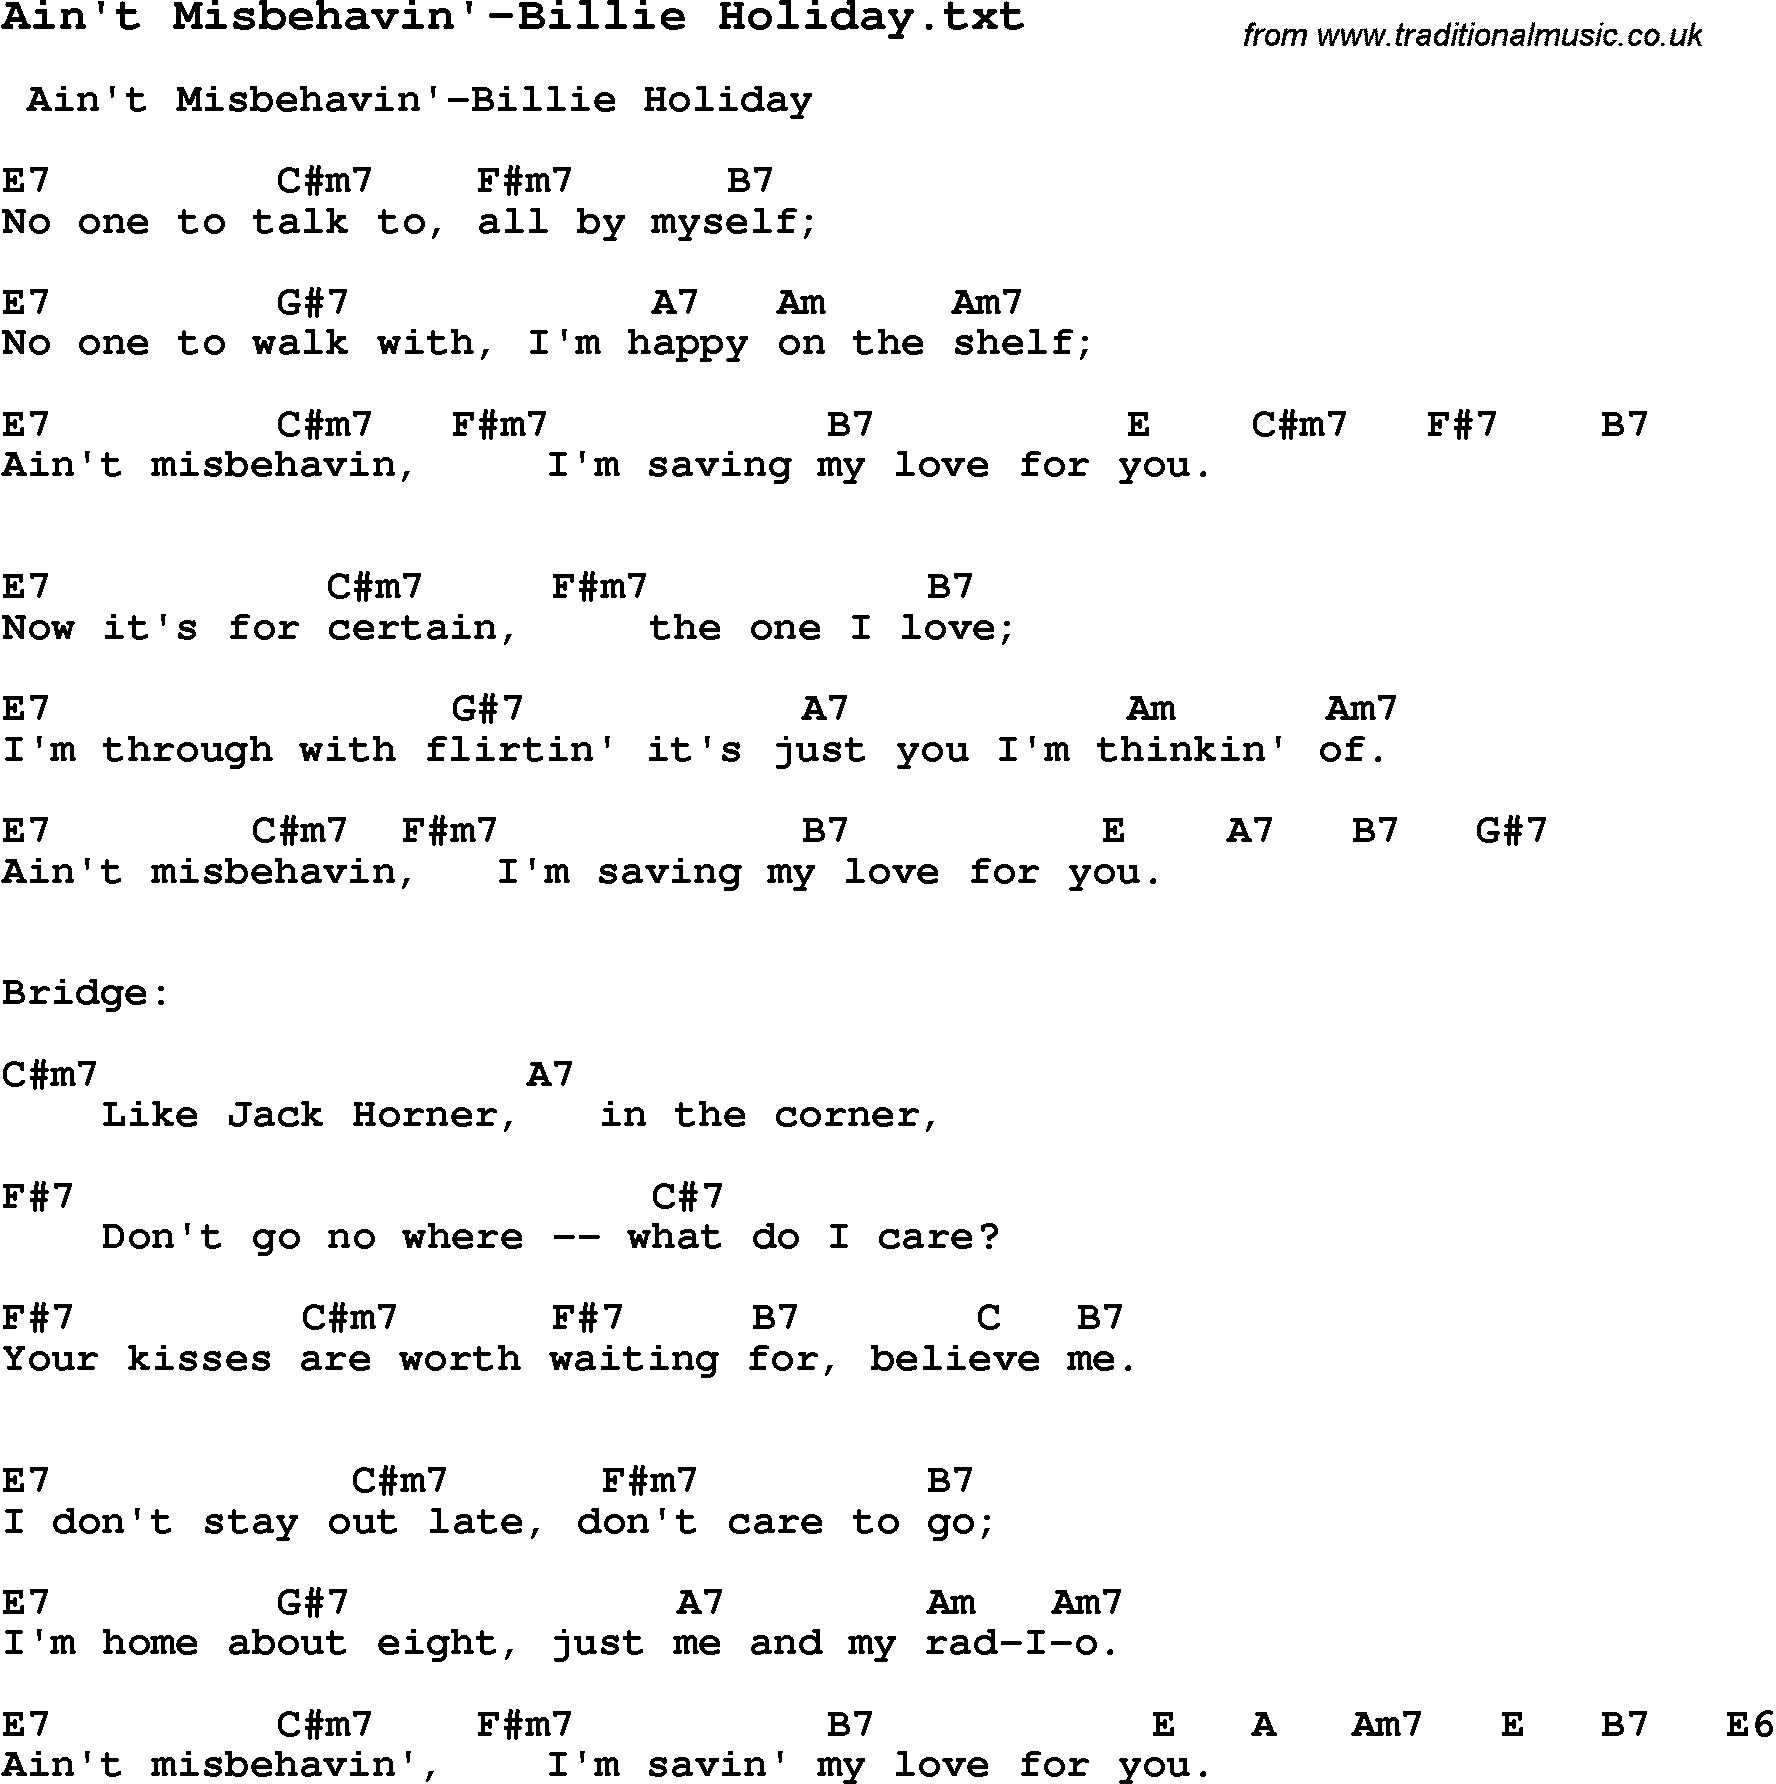 Jazz Song from top bands and vocal artists with chords, tabs and lyrics - Ain't Misbehavin'-Billie Holiday